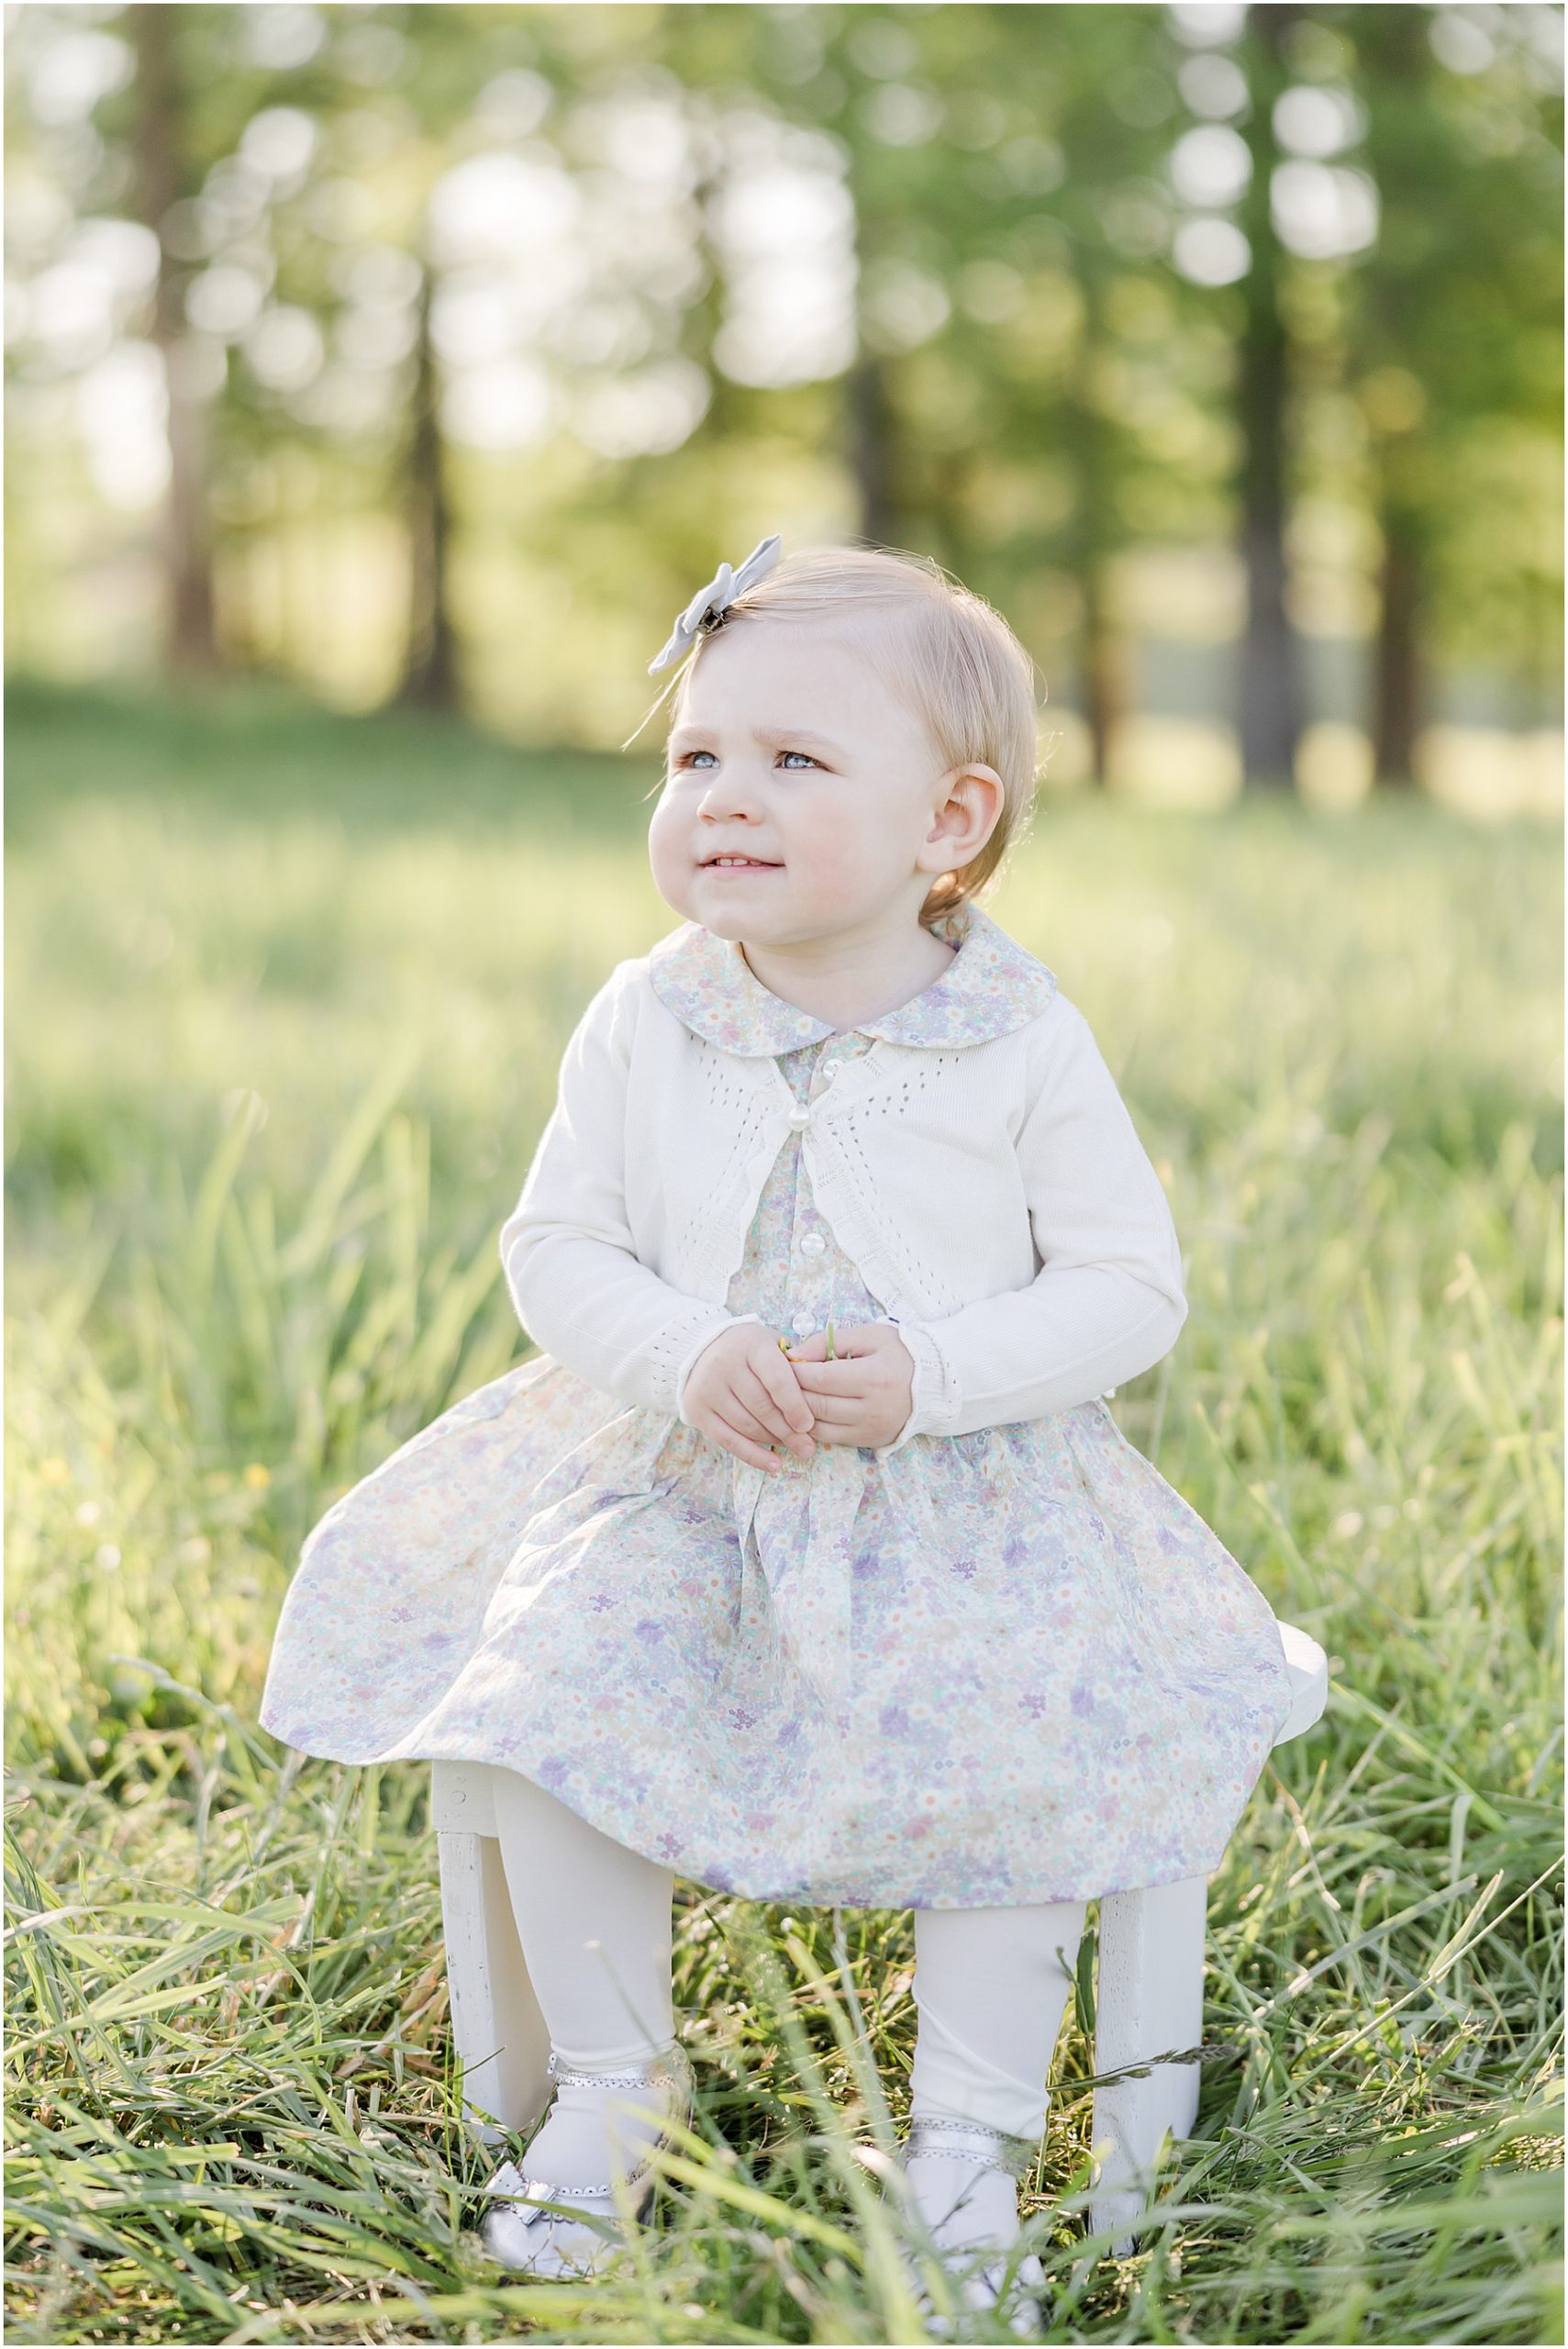 Portrait of a toddler in a dress sitting on a little stool in a grassy field.